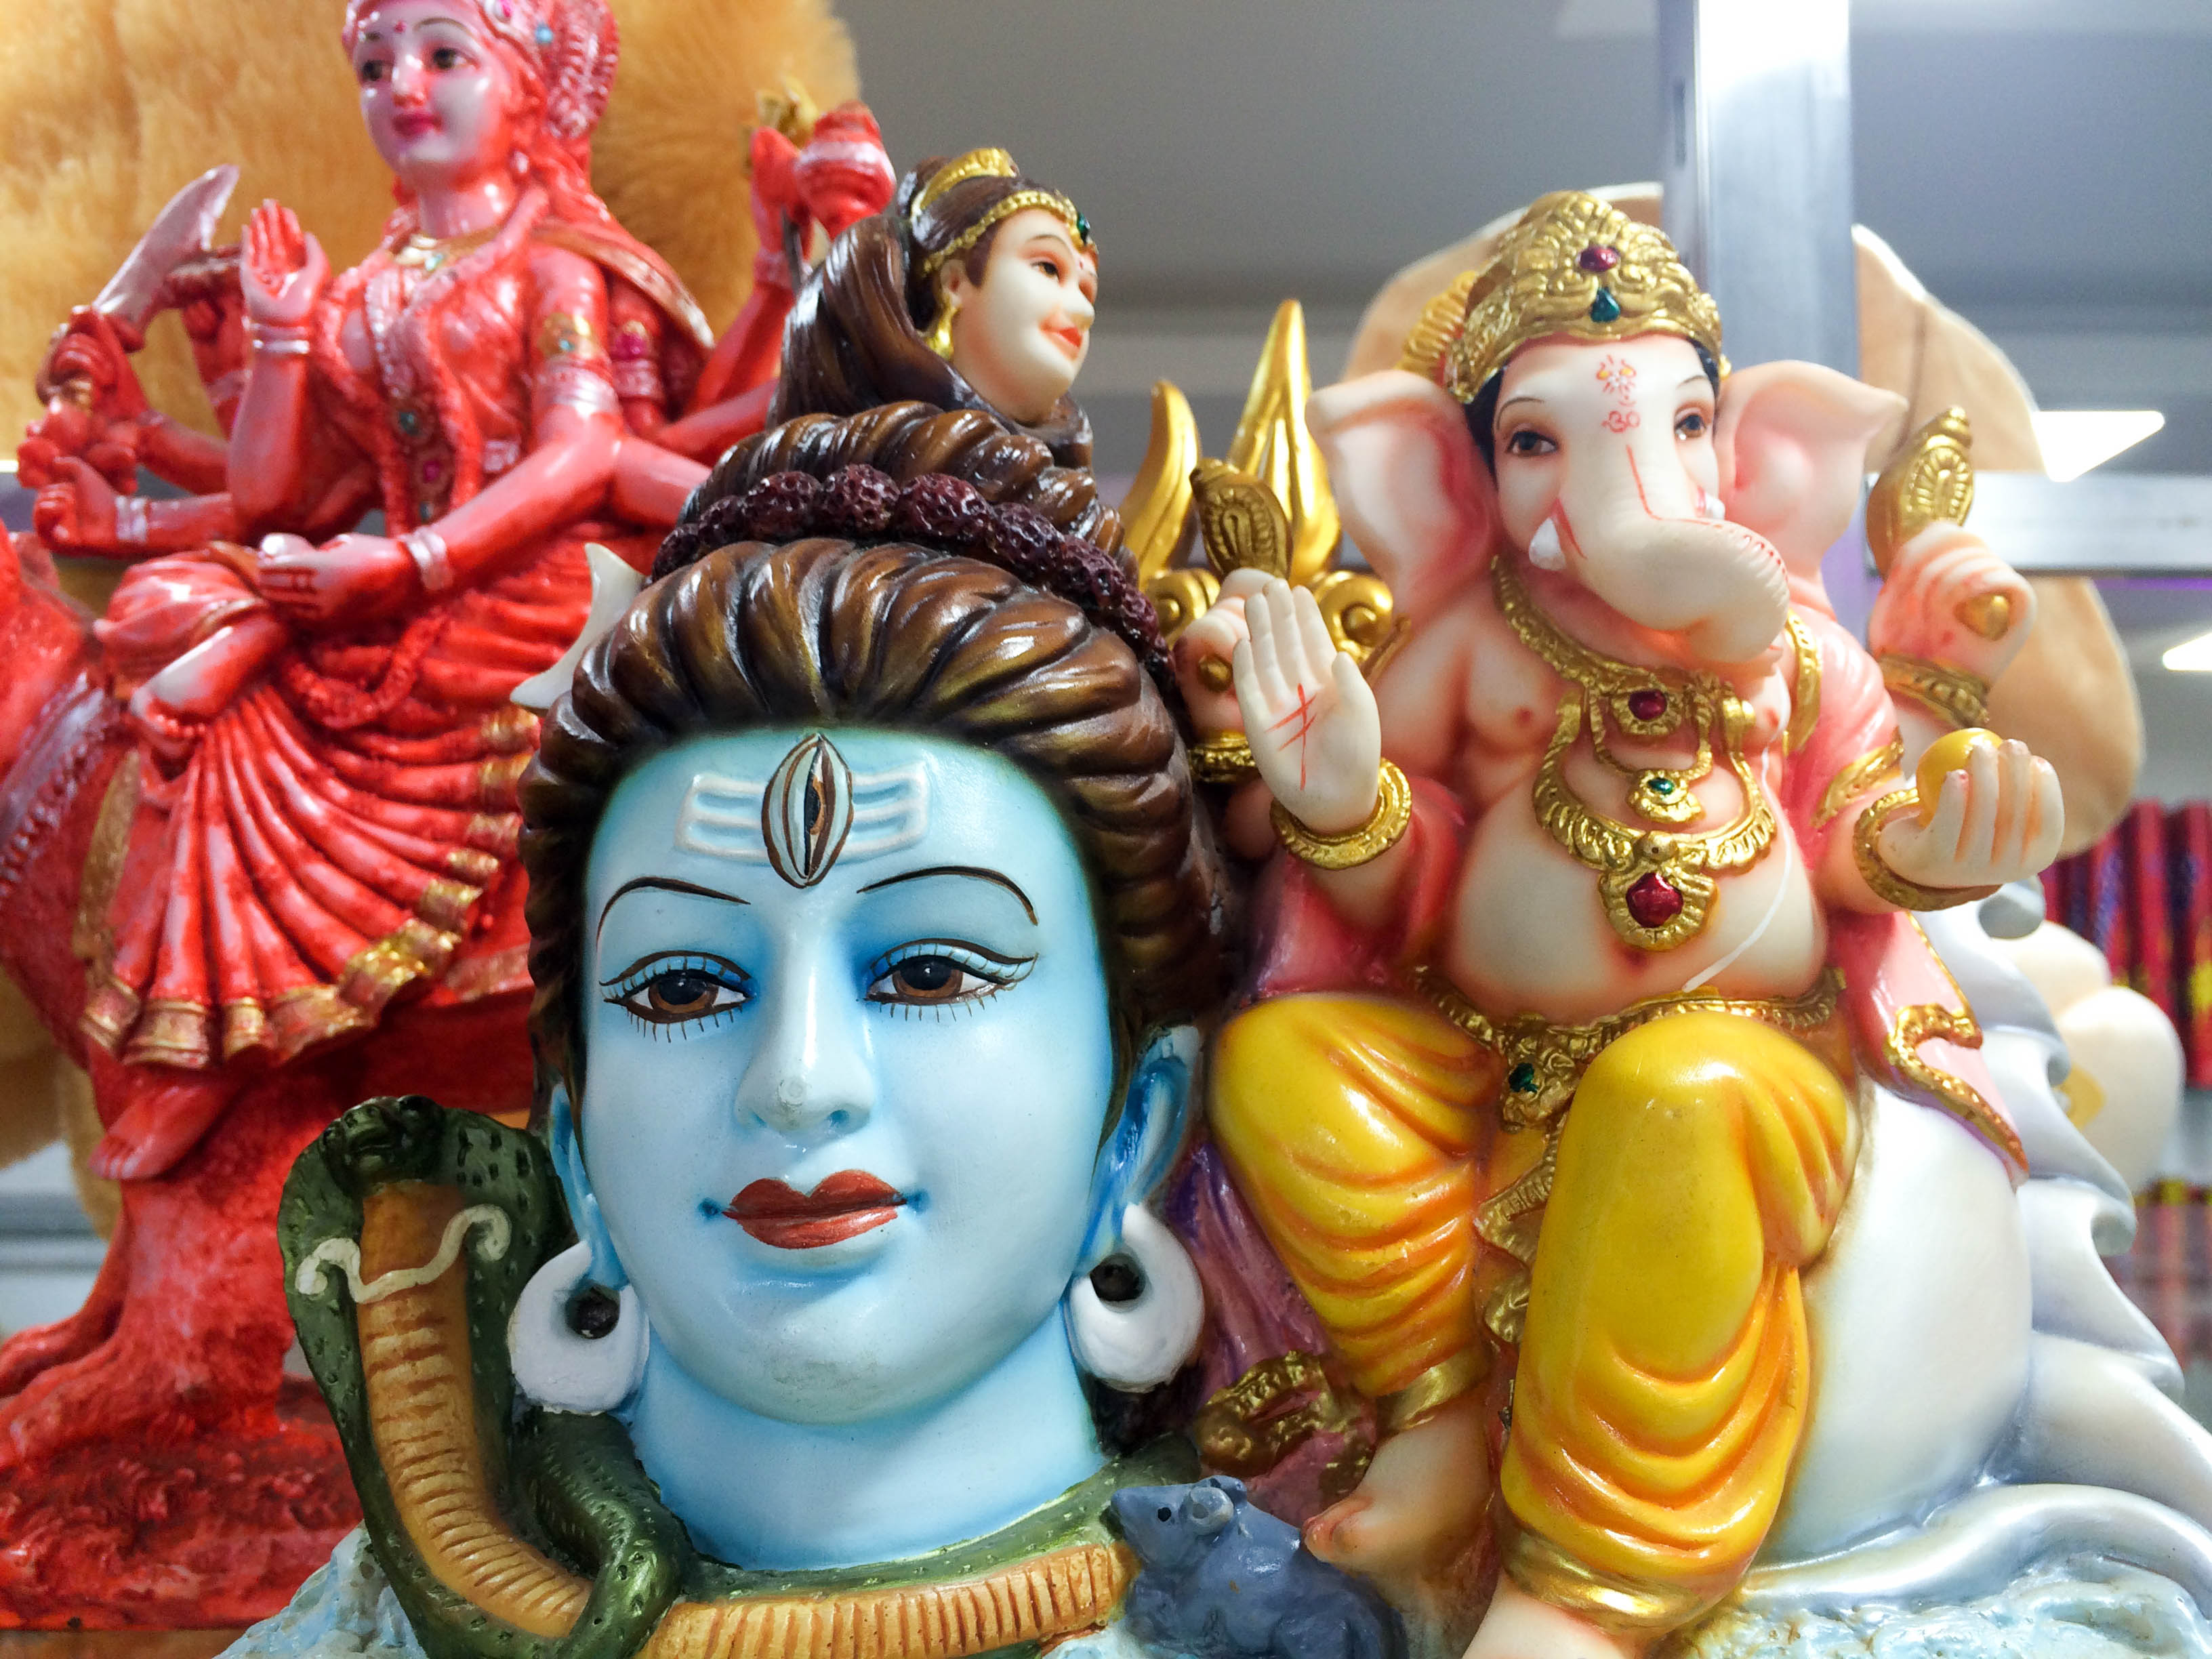 File:Shiva Parvati Ganesha Images - A statuette representing Lord Ganesh  and his father Lord  - Wikimedia Commons